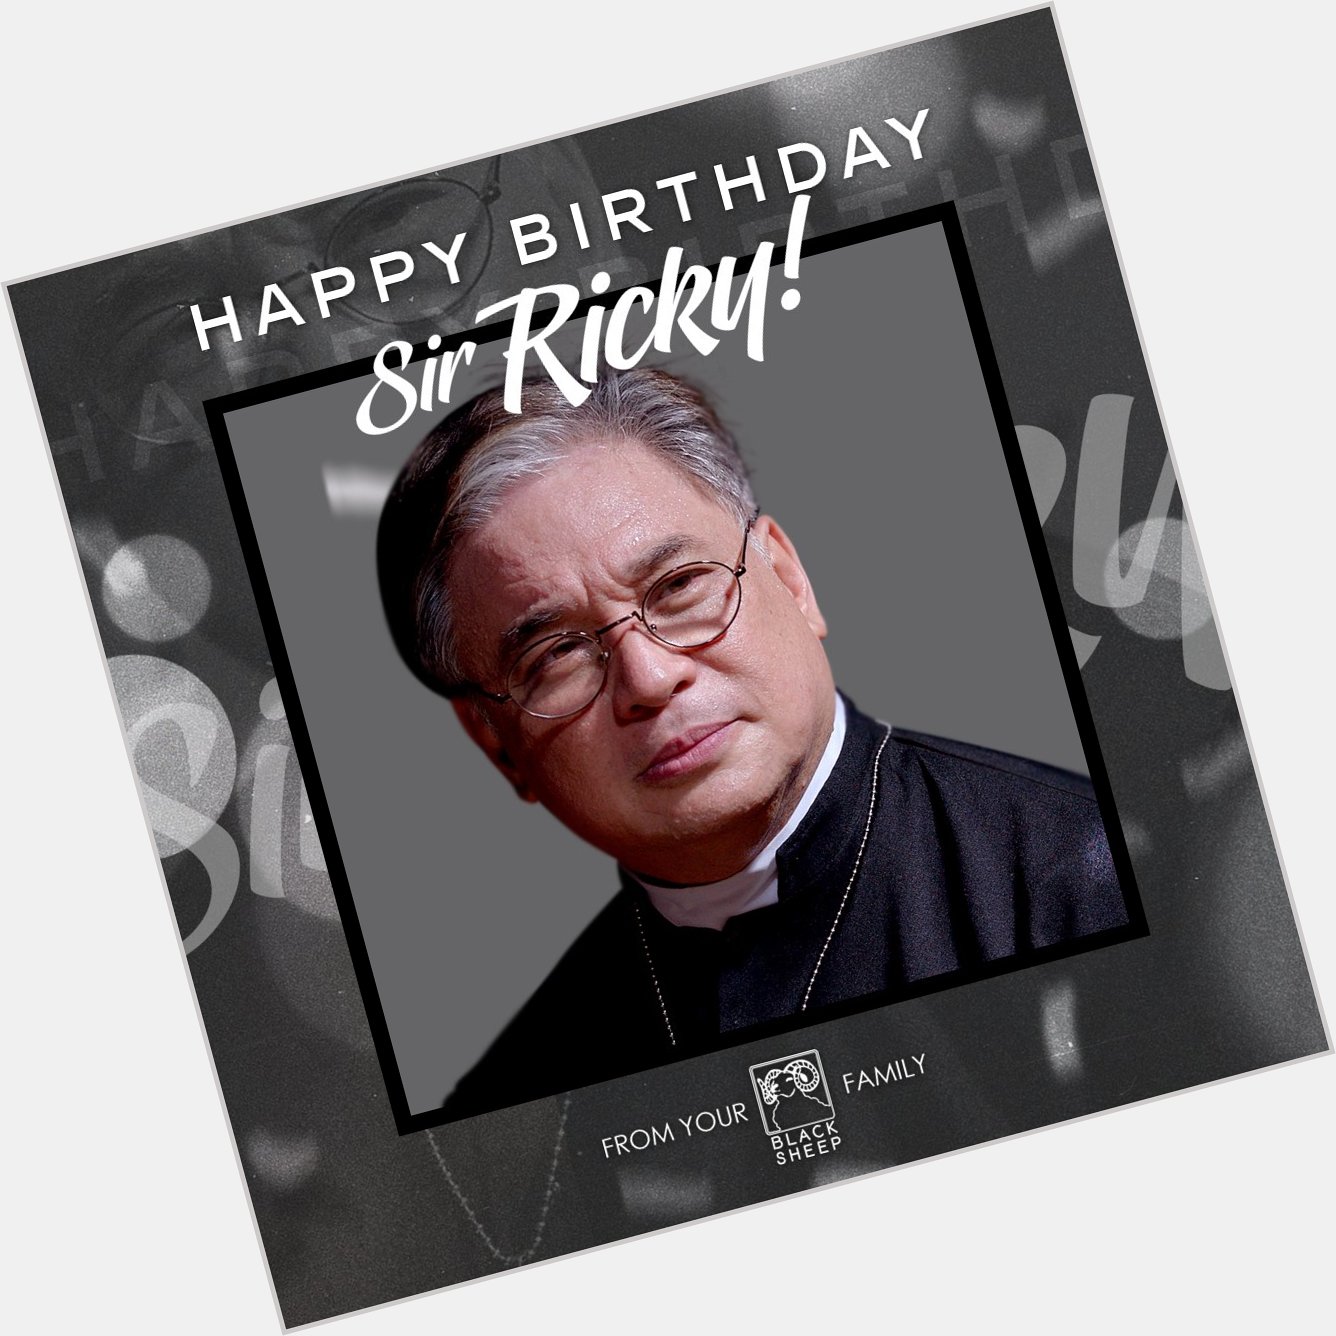 Happy birthday, Sir Ricky Davao!!! Sending all the love from your Black Sheep family!  